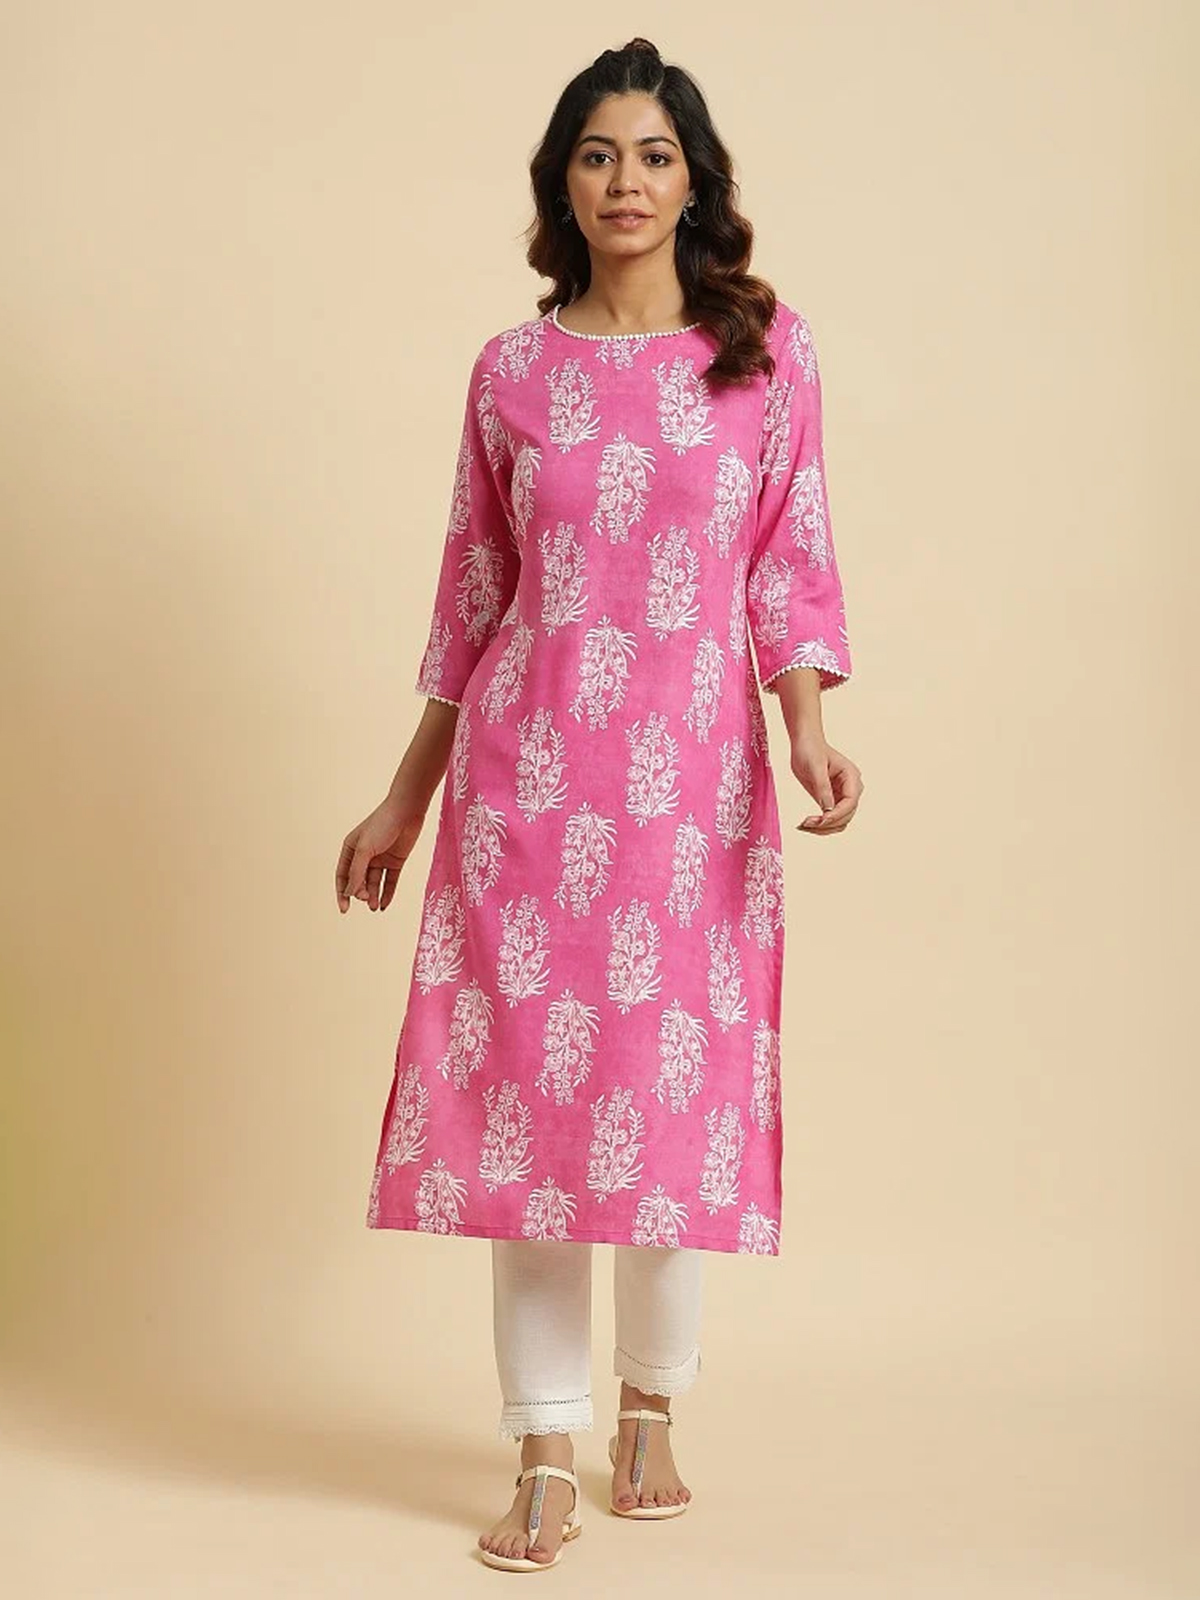 Cotton Fabric Online For Kurti